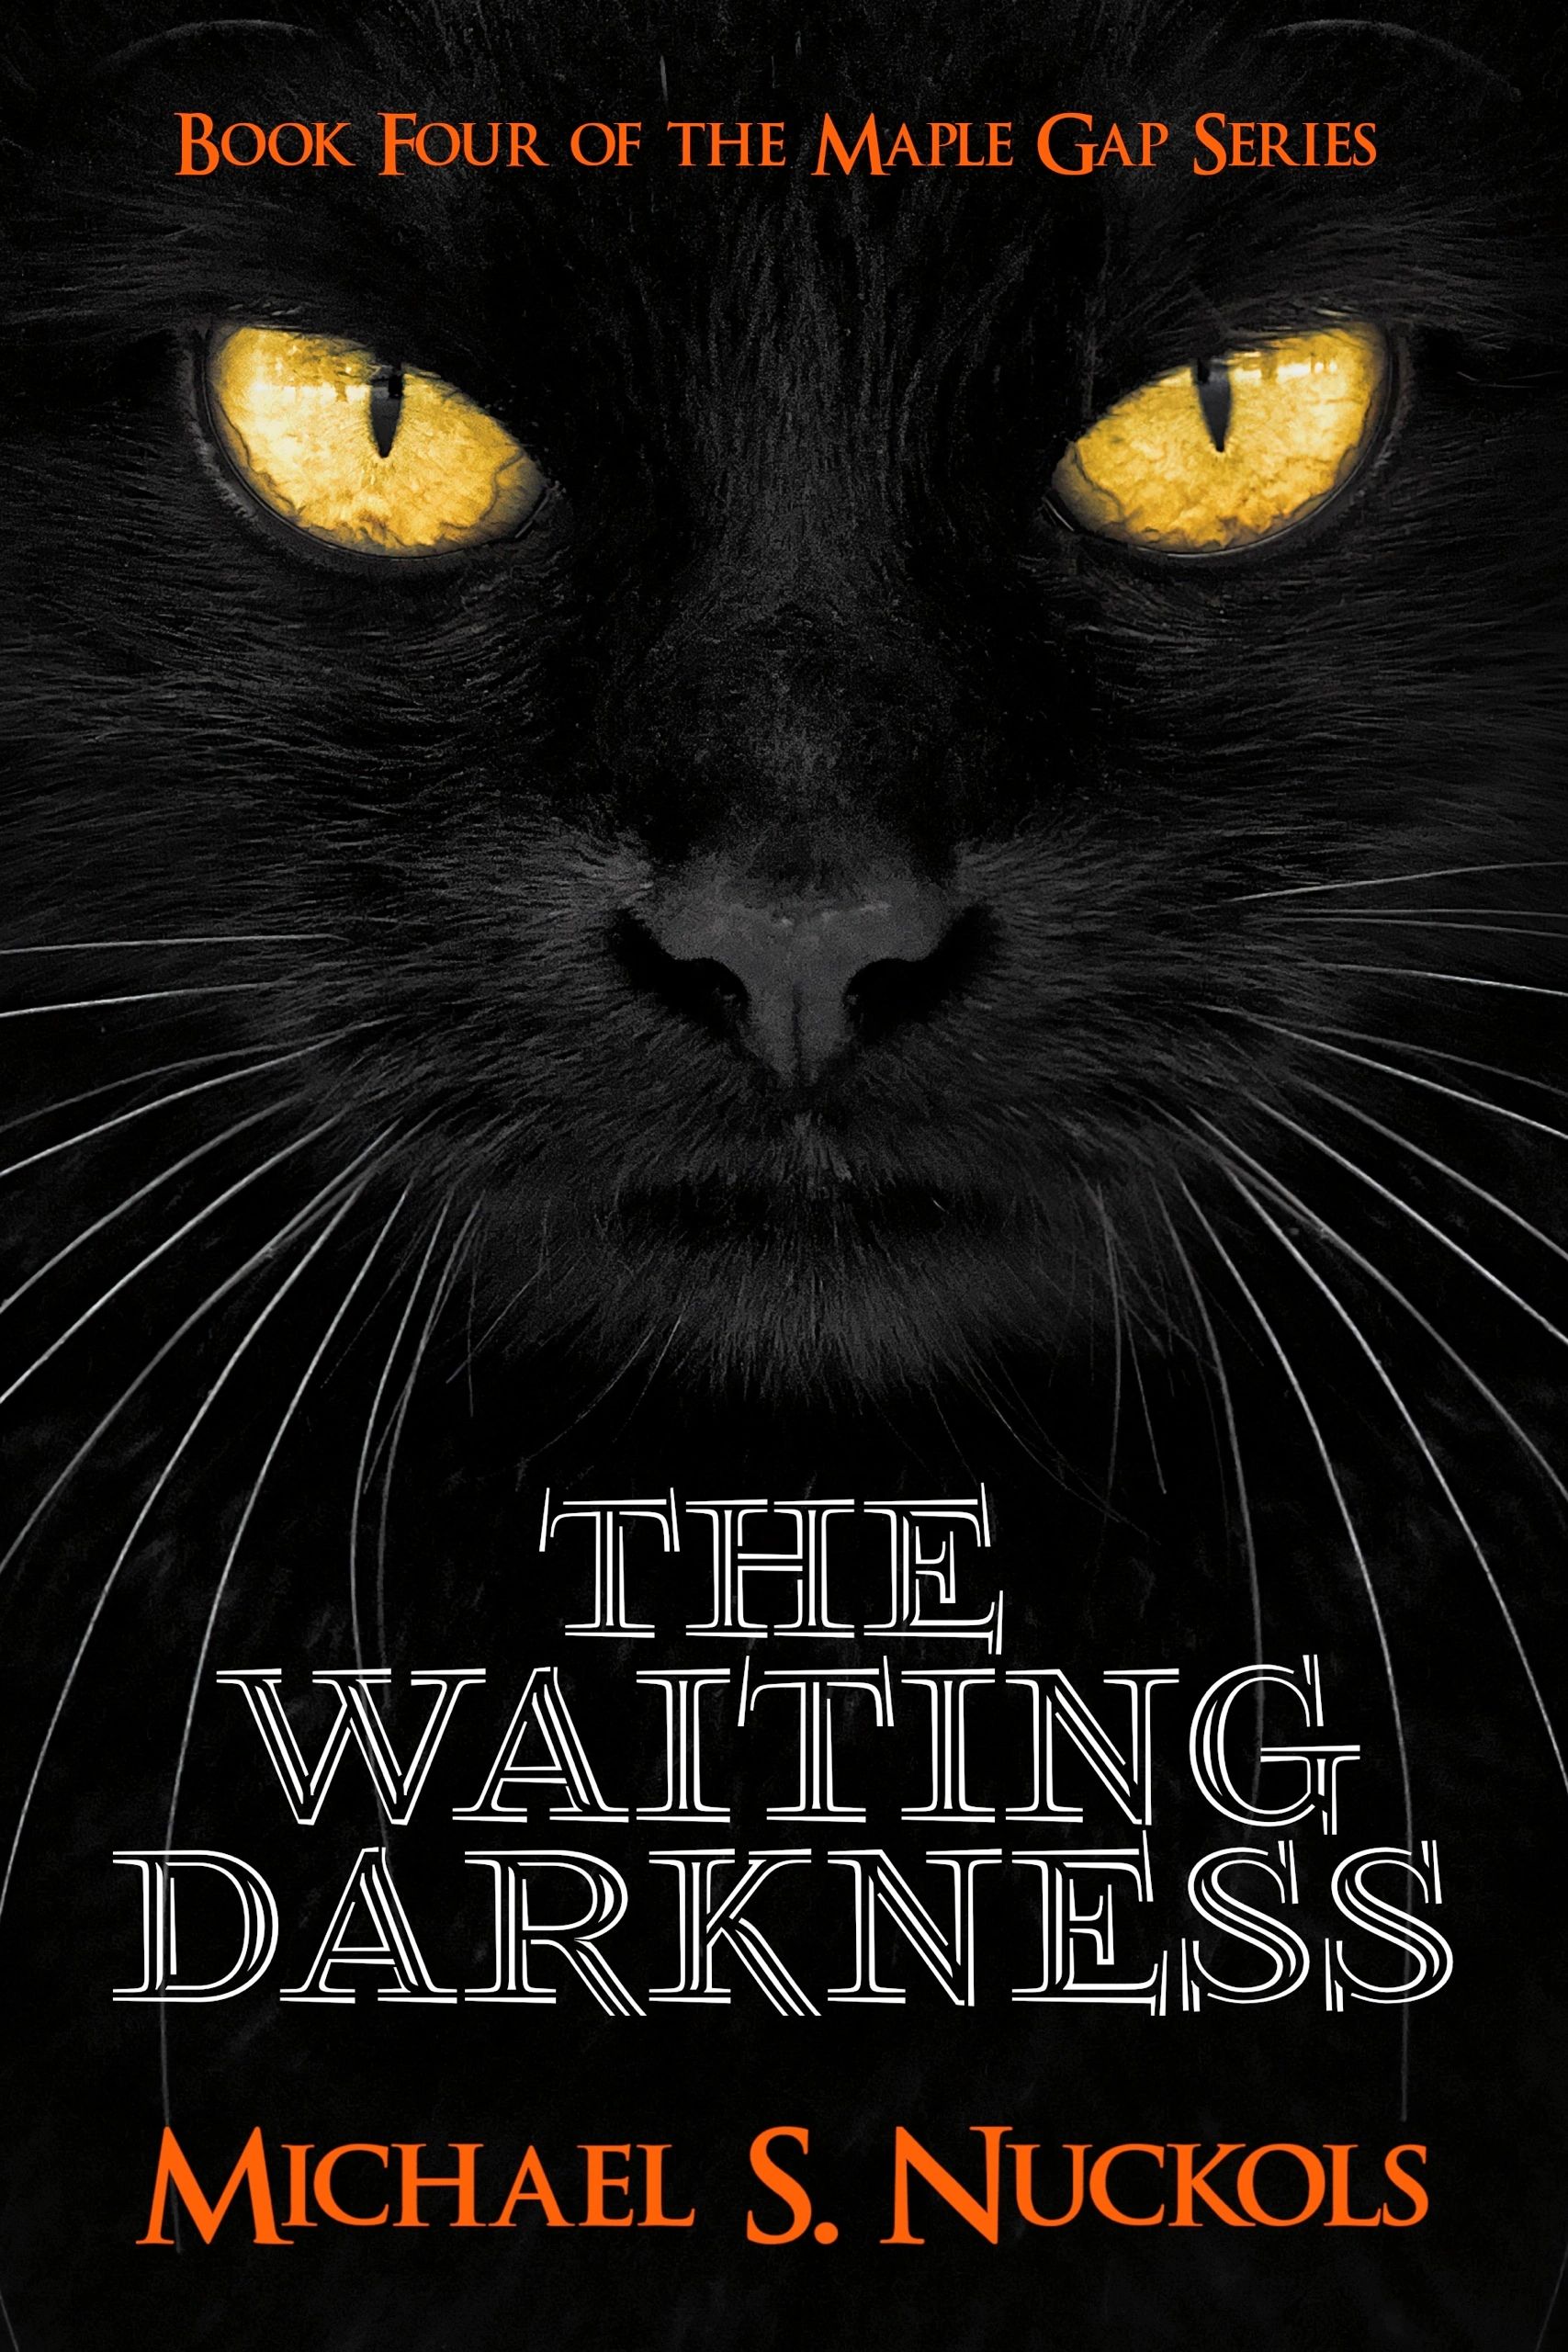 The cover of The Waiting Darkness shows a black cat